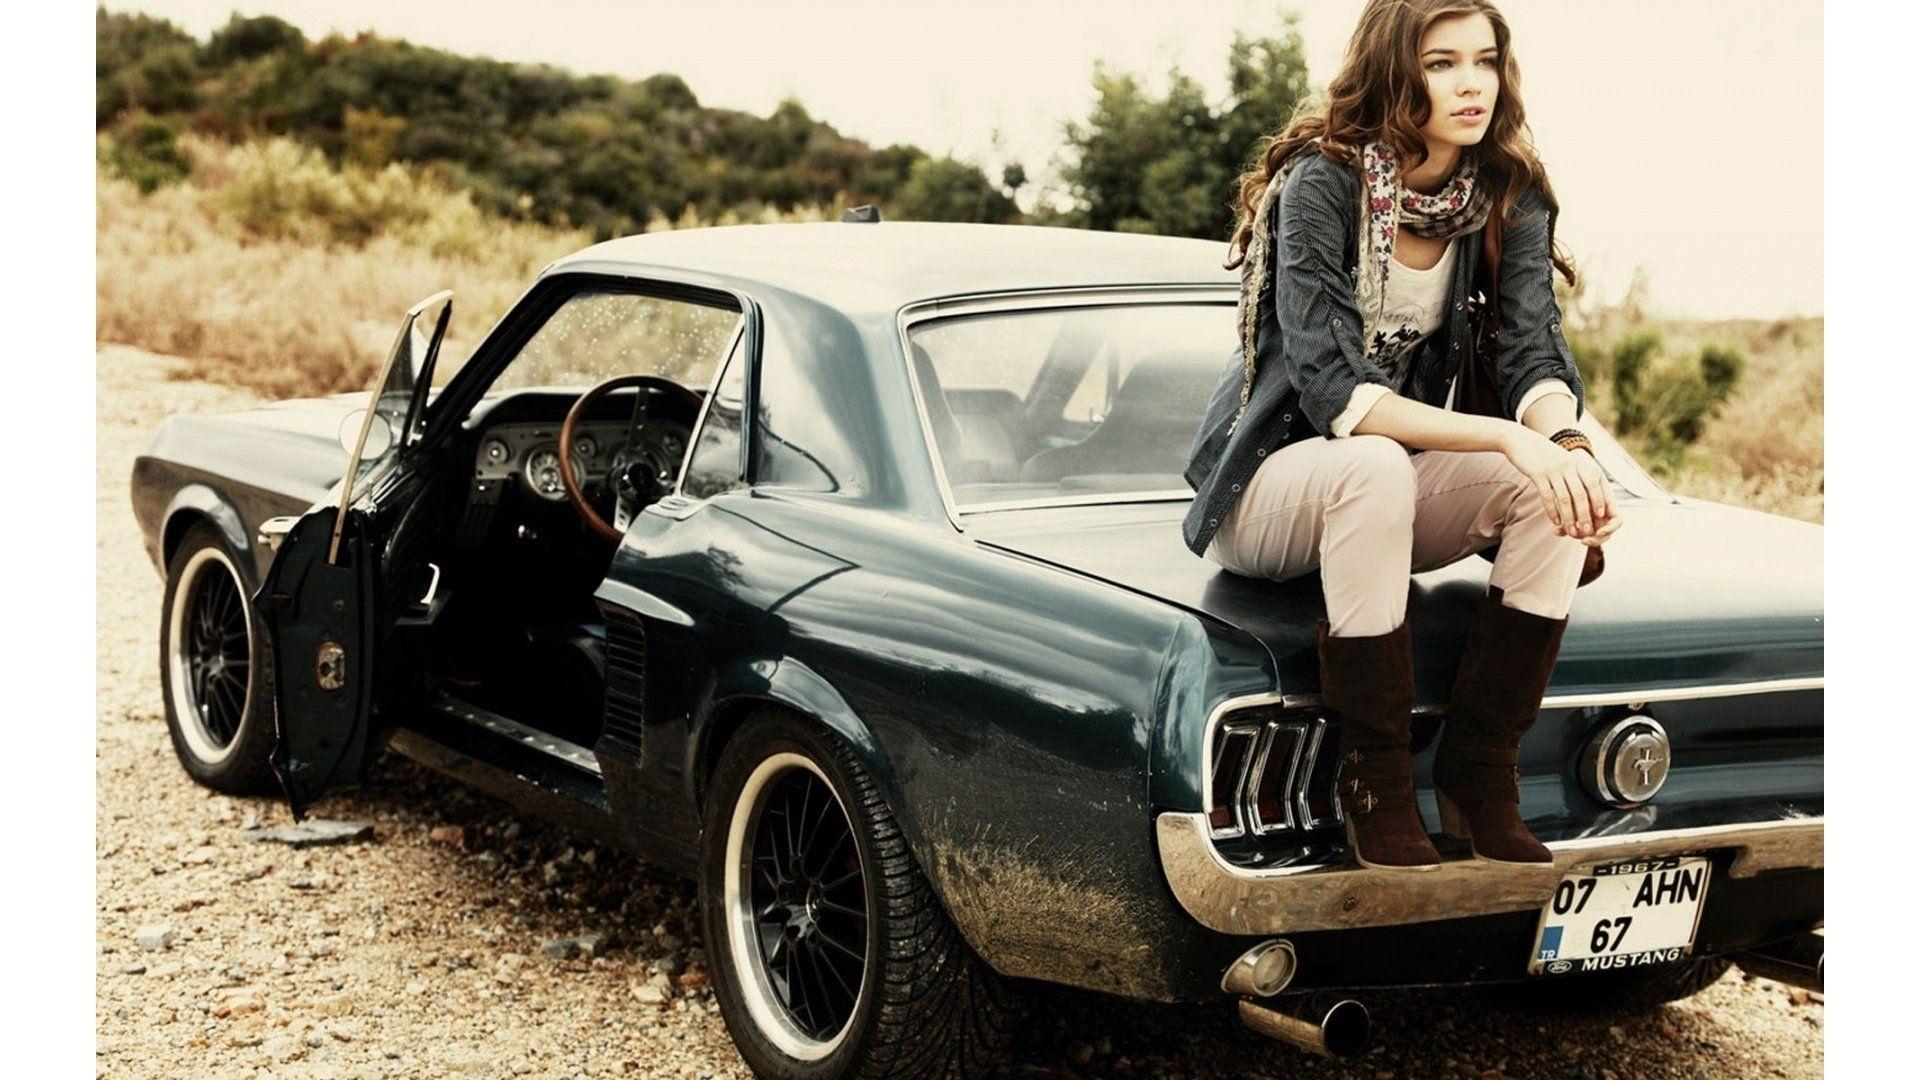 cool cars wallpaper with girls. girl and car wallpaper 03. girls